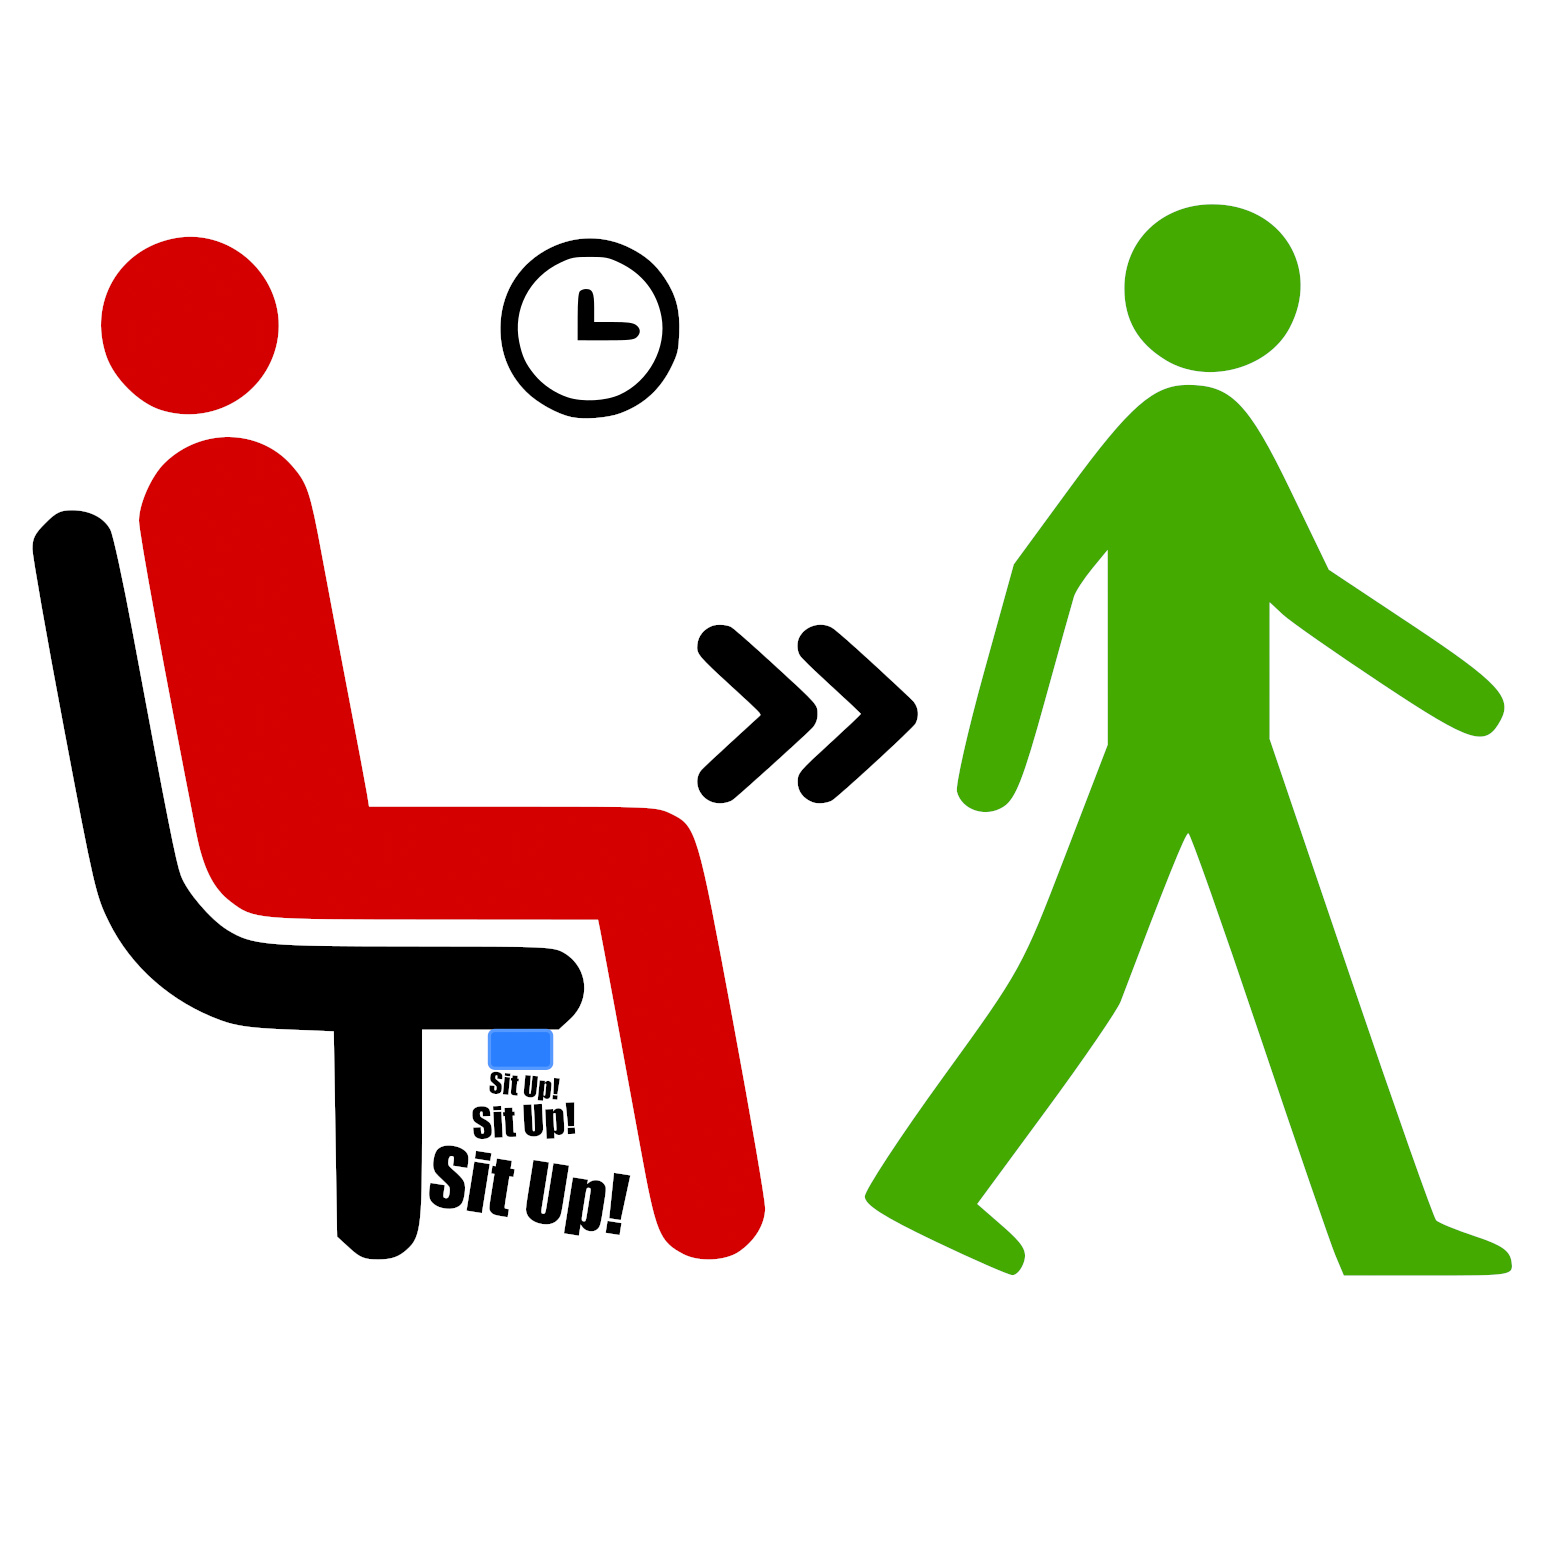 Sitting-up icons | Noun Project